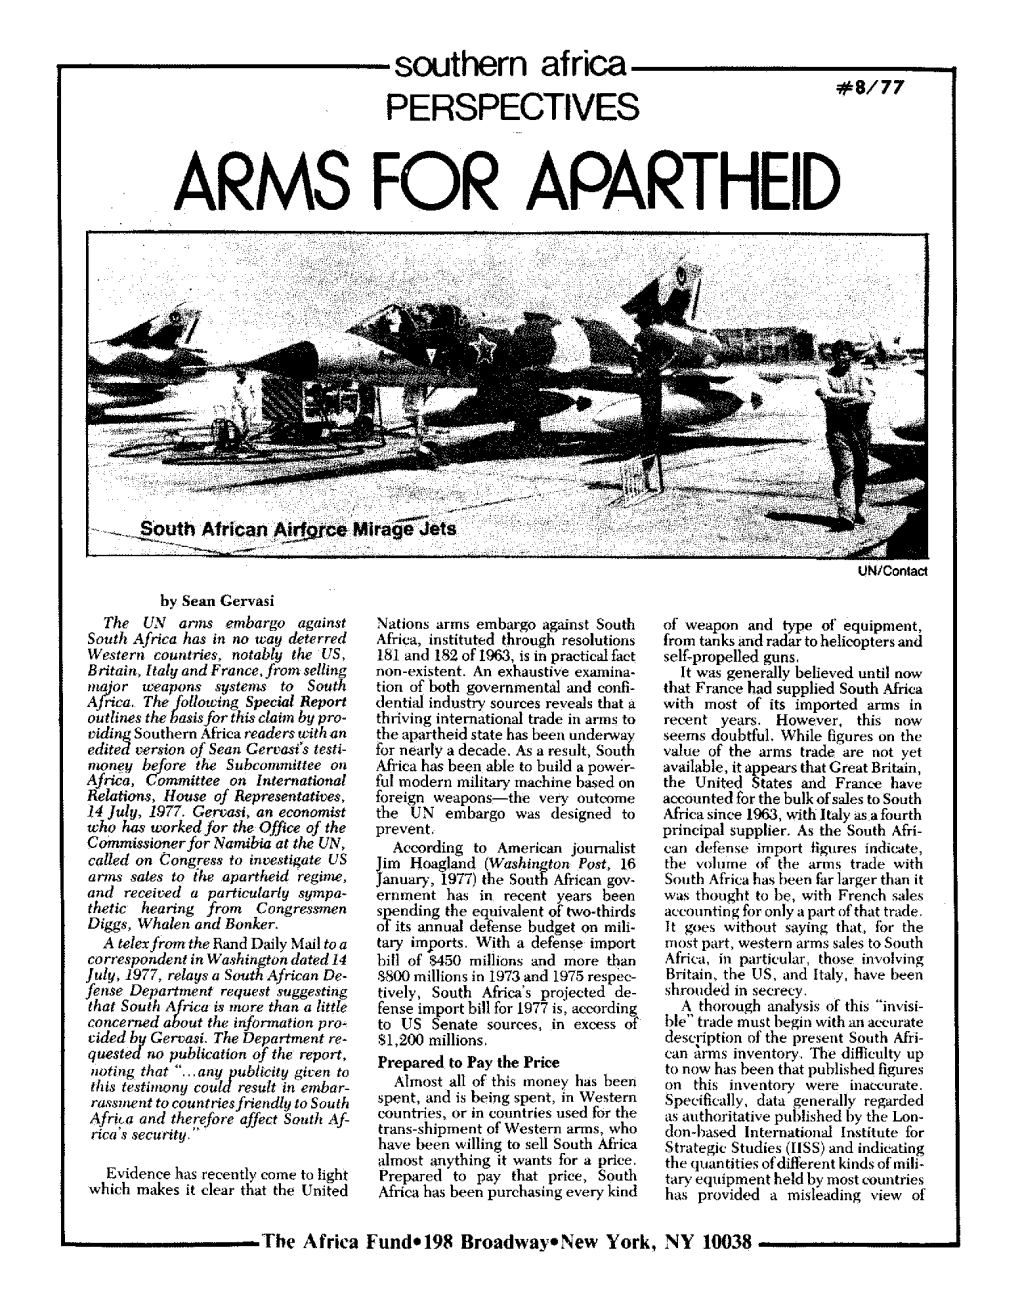 Arms for Apartheid